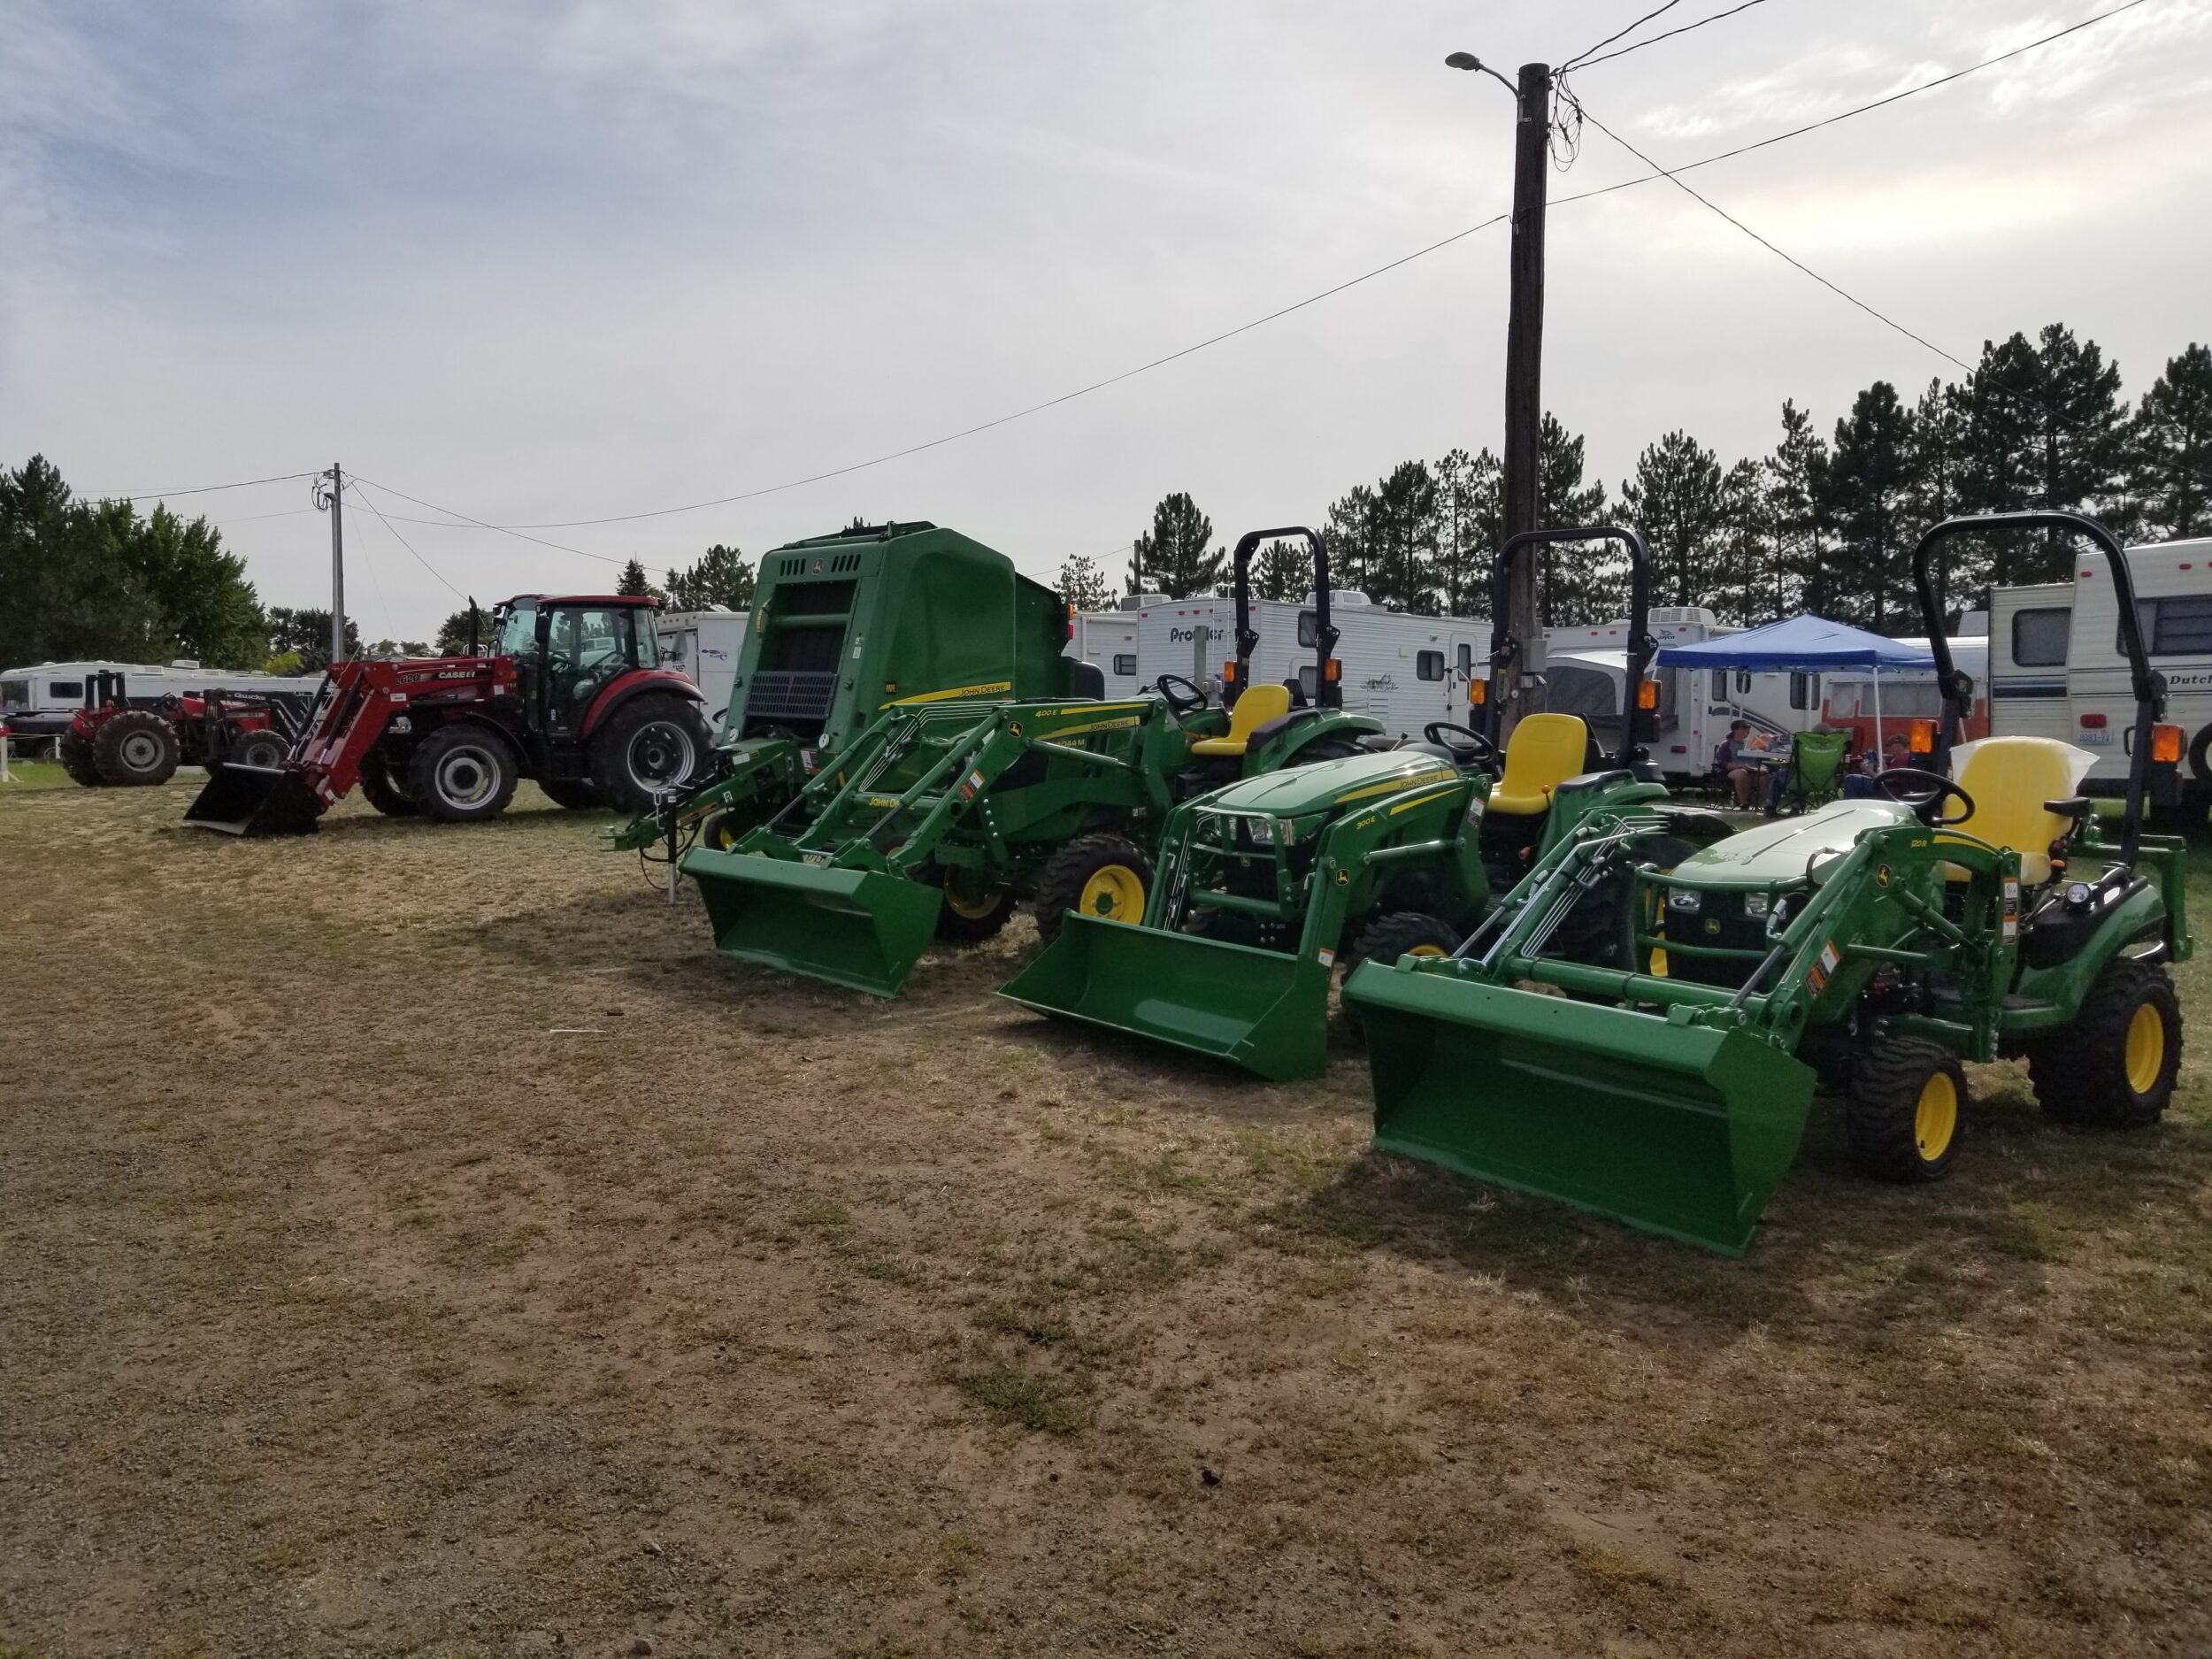 Tractors for show in the Midway.
